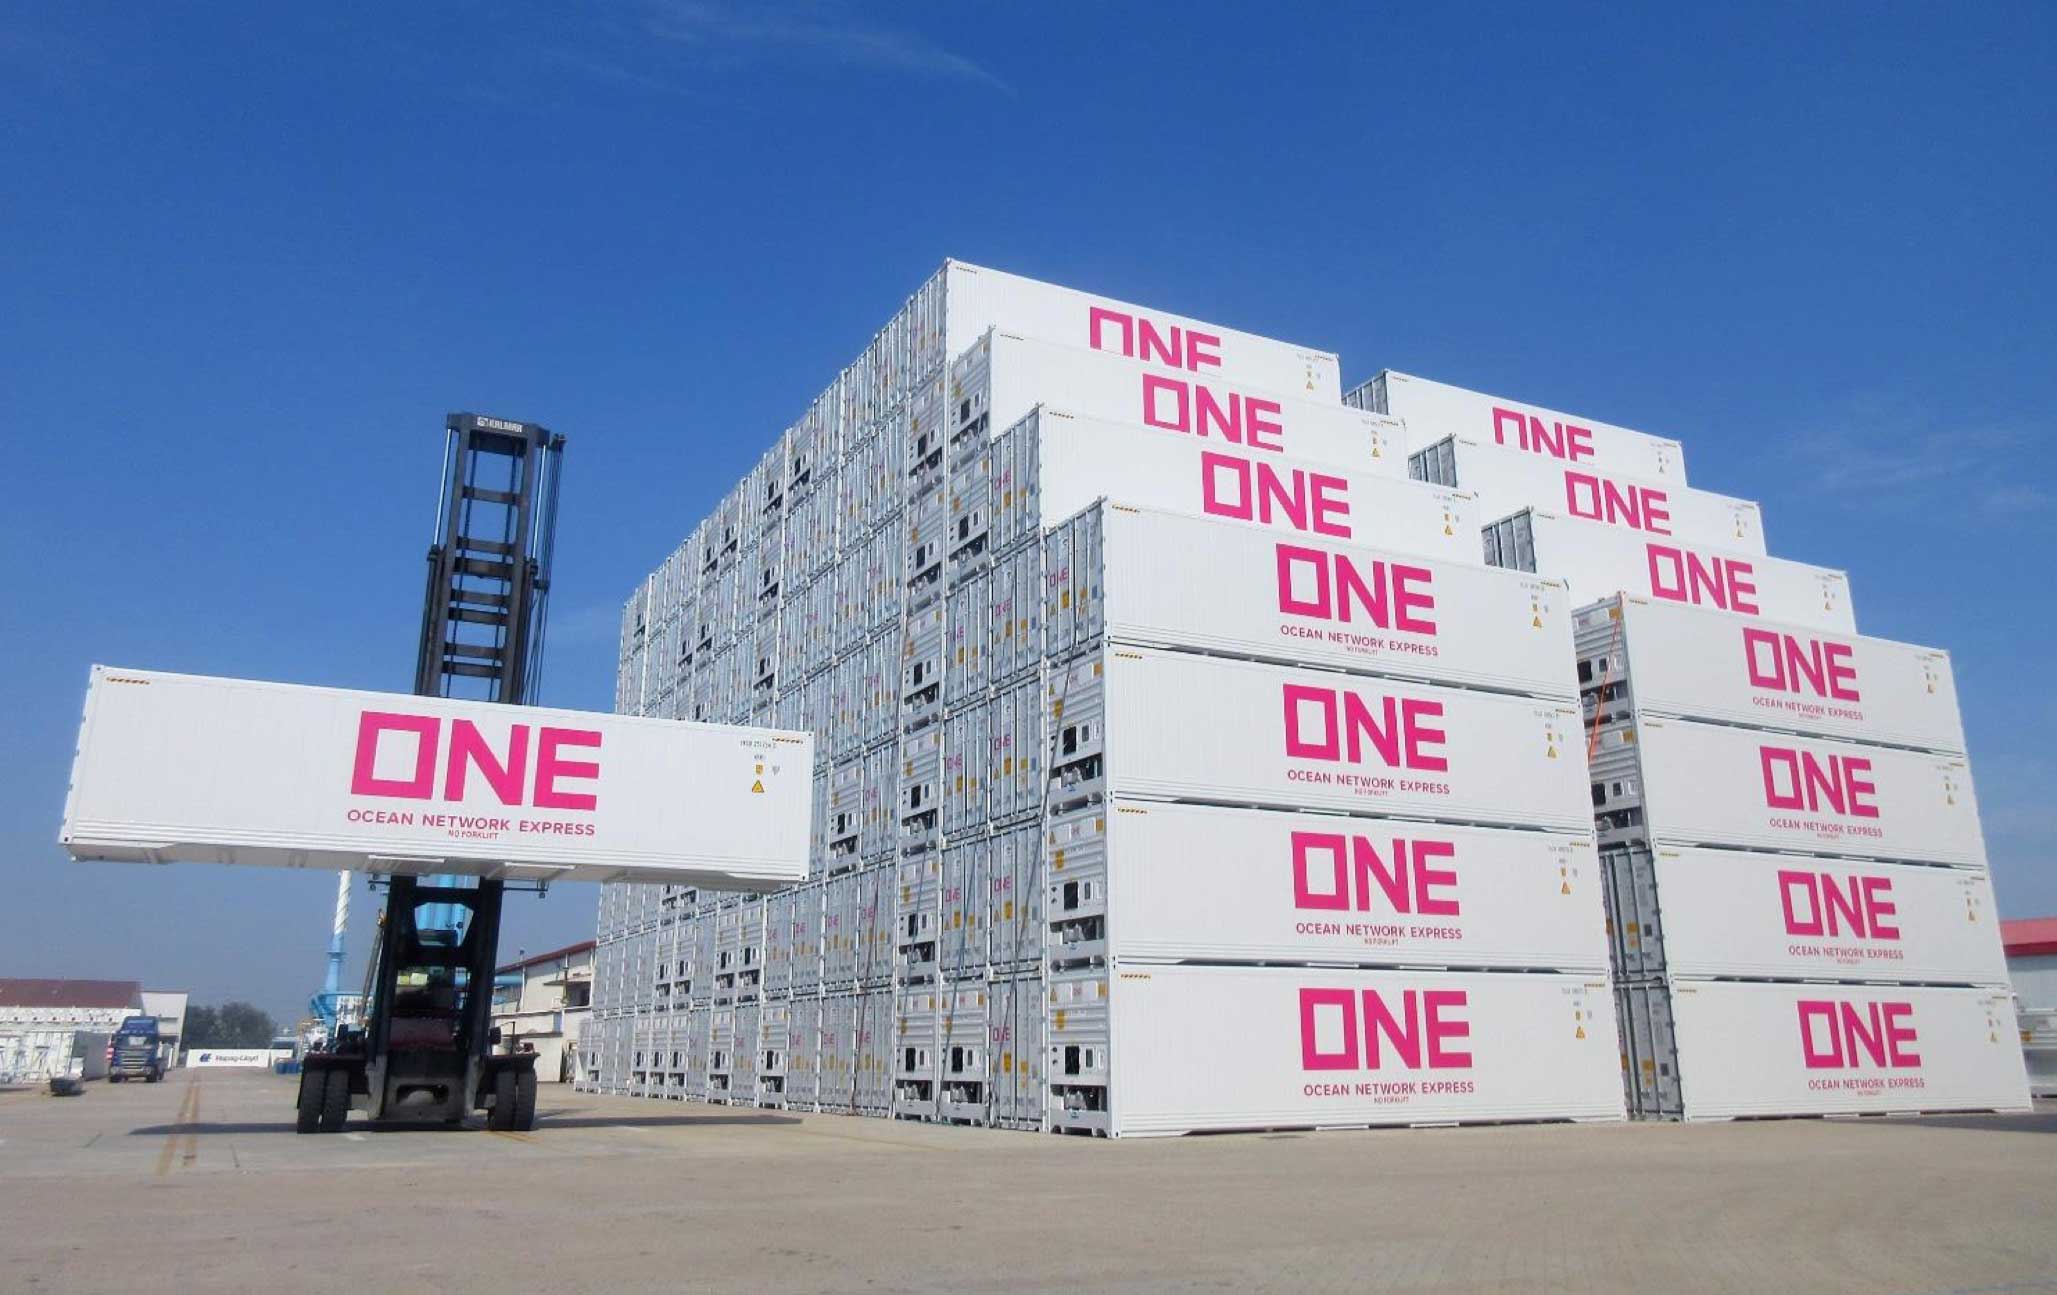 One ordena nuevos Reefers,One orders new Reefers